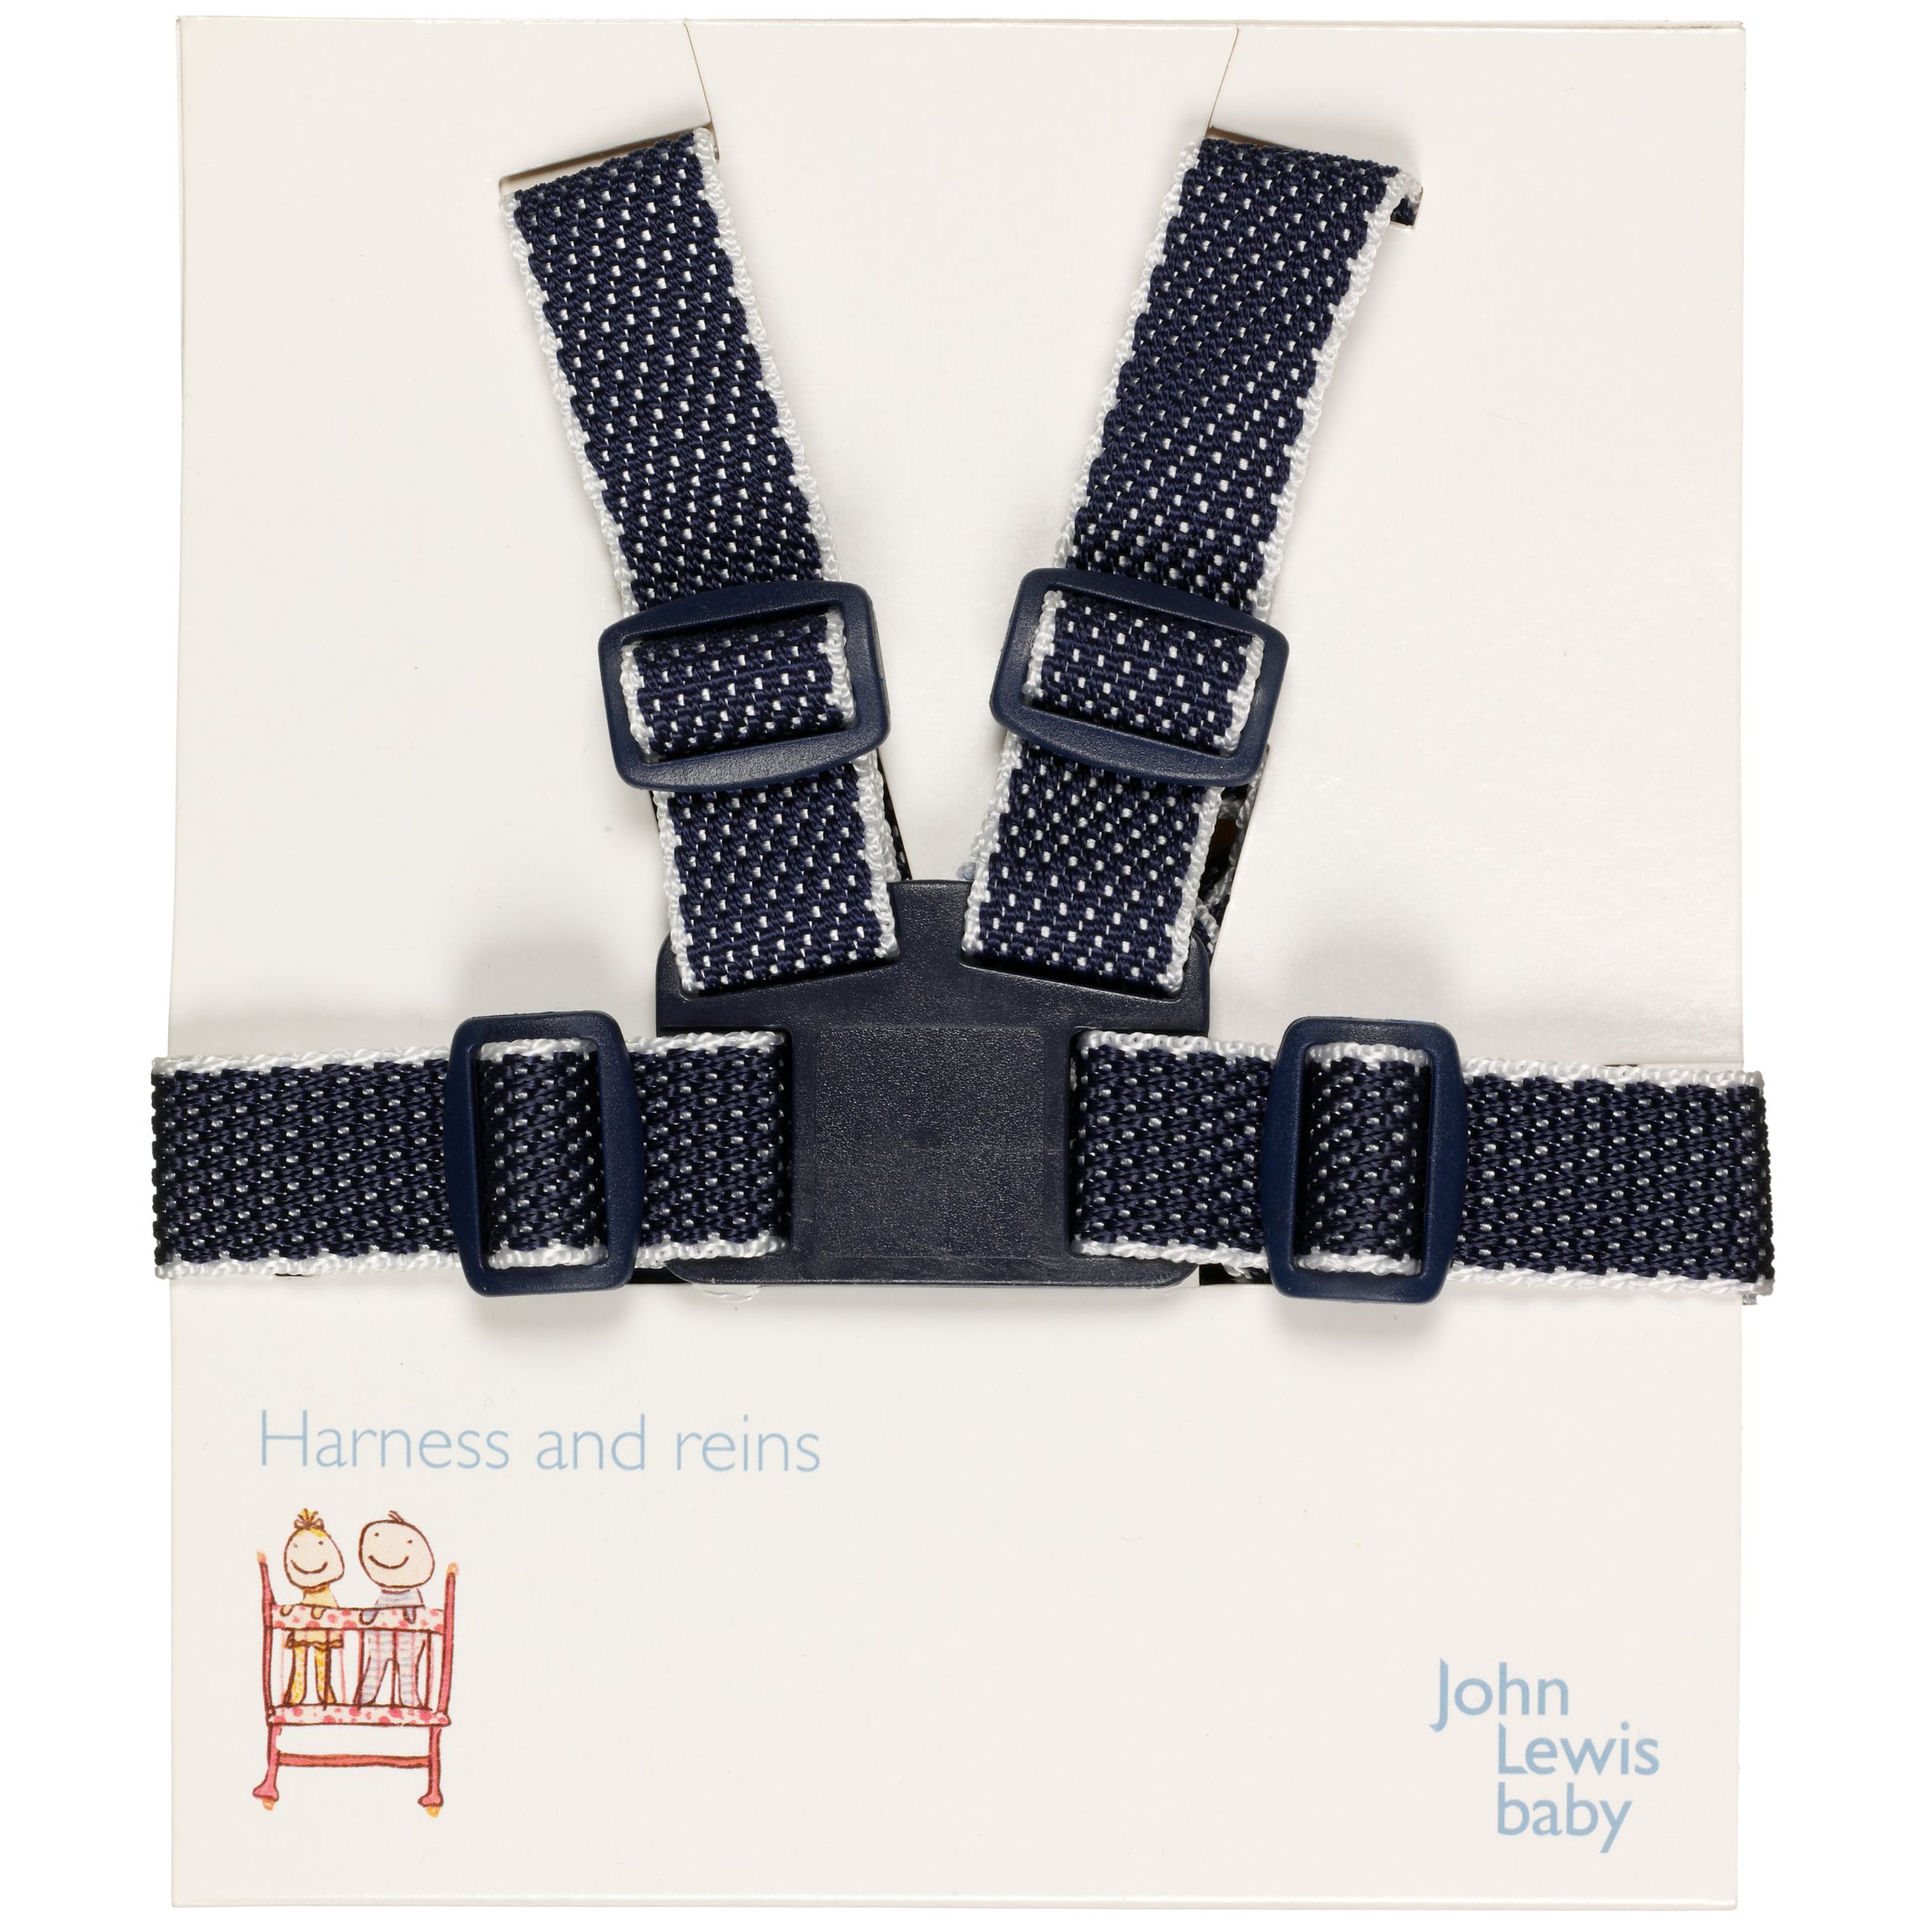 john lewis Baby Harness and Reins- Navy and White